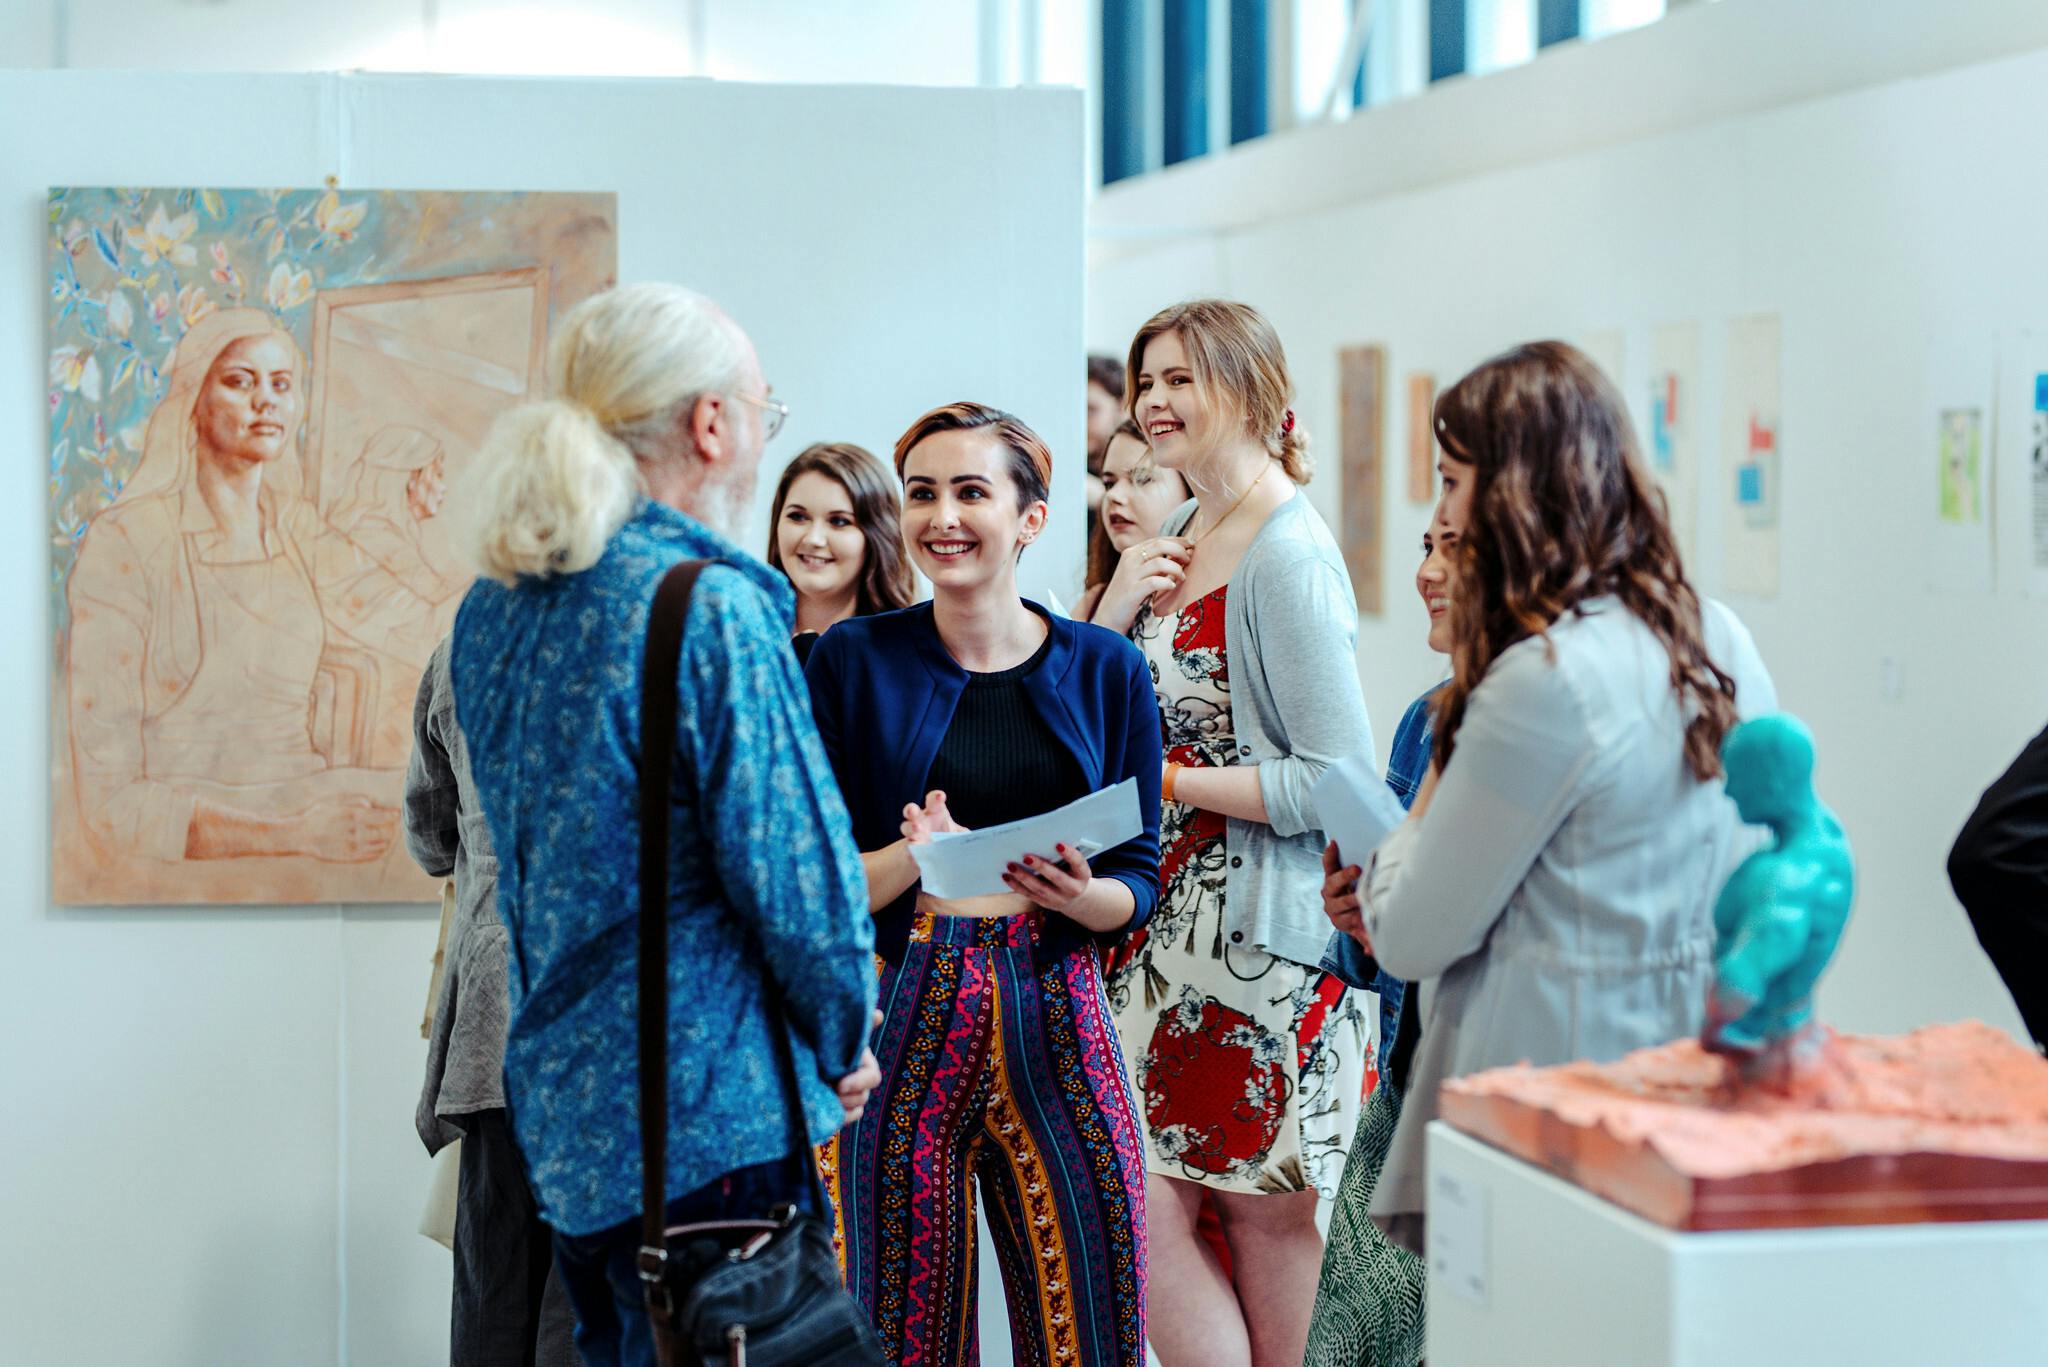 Four women smile and speak to a man in a gallery space with paintings hung on the walls